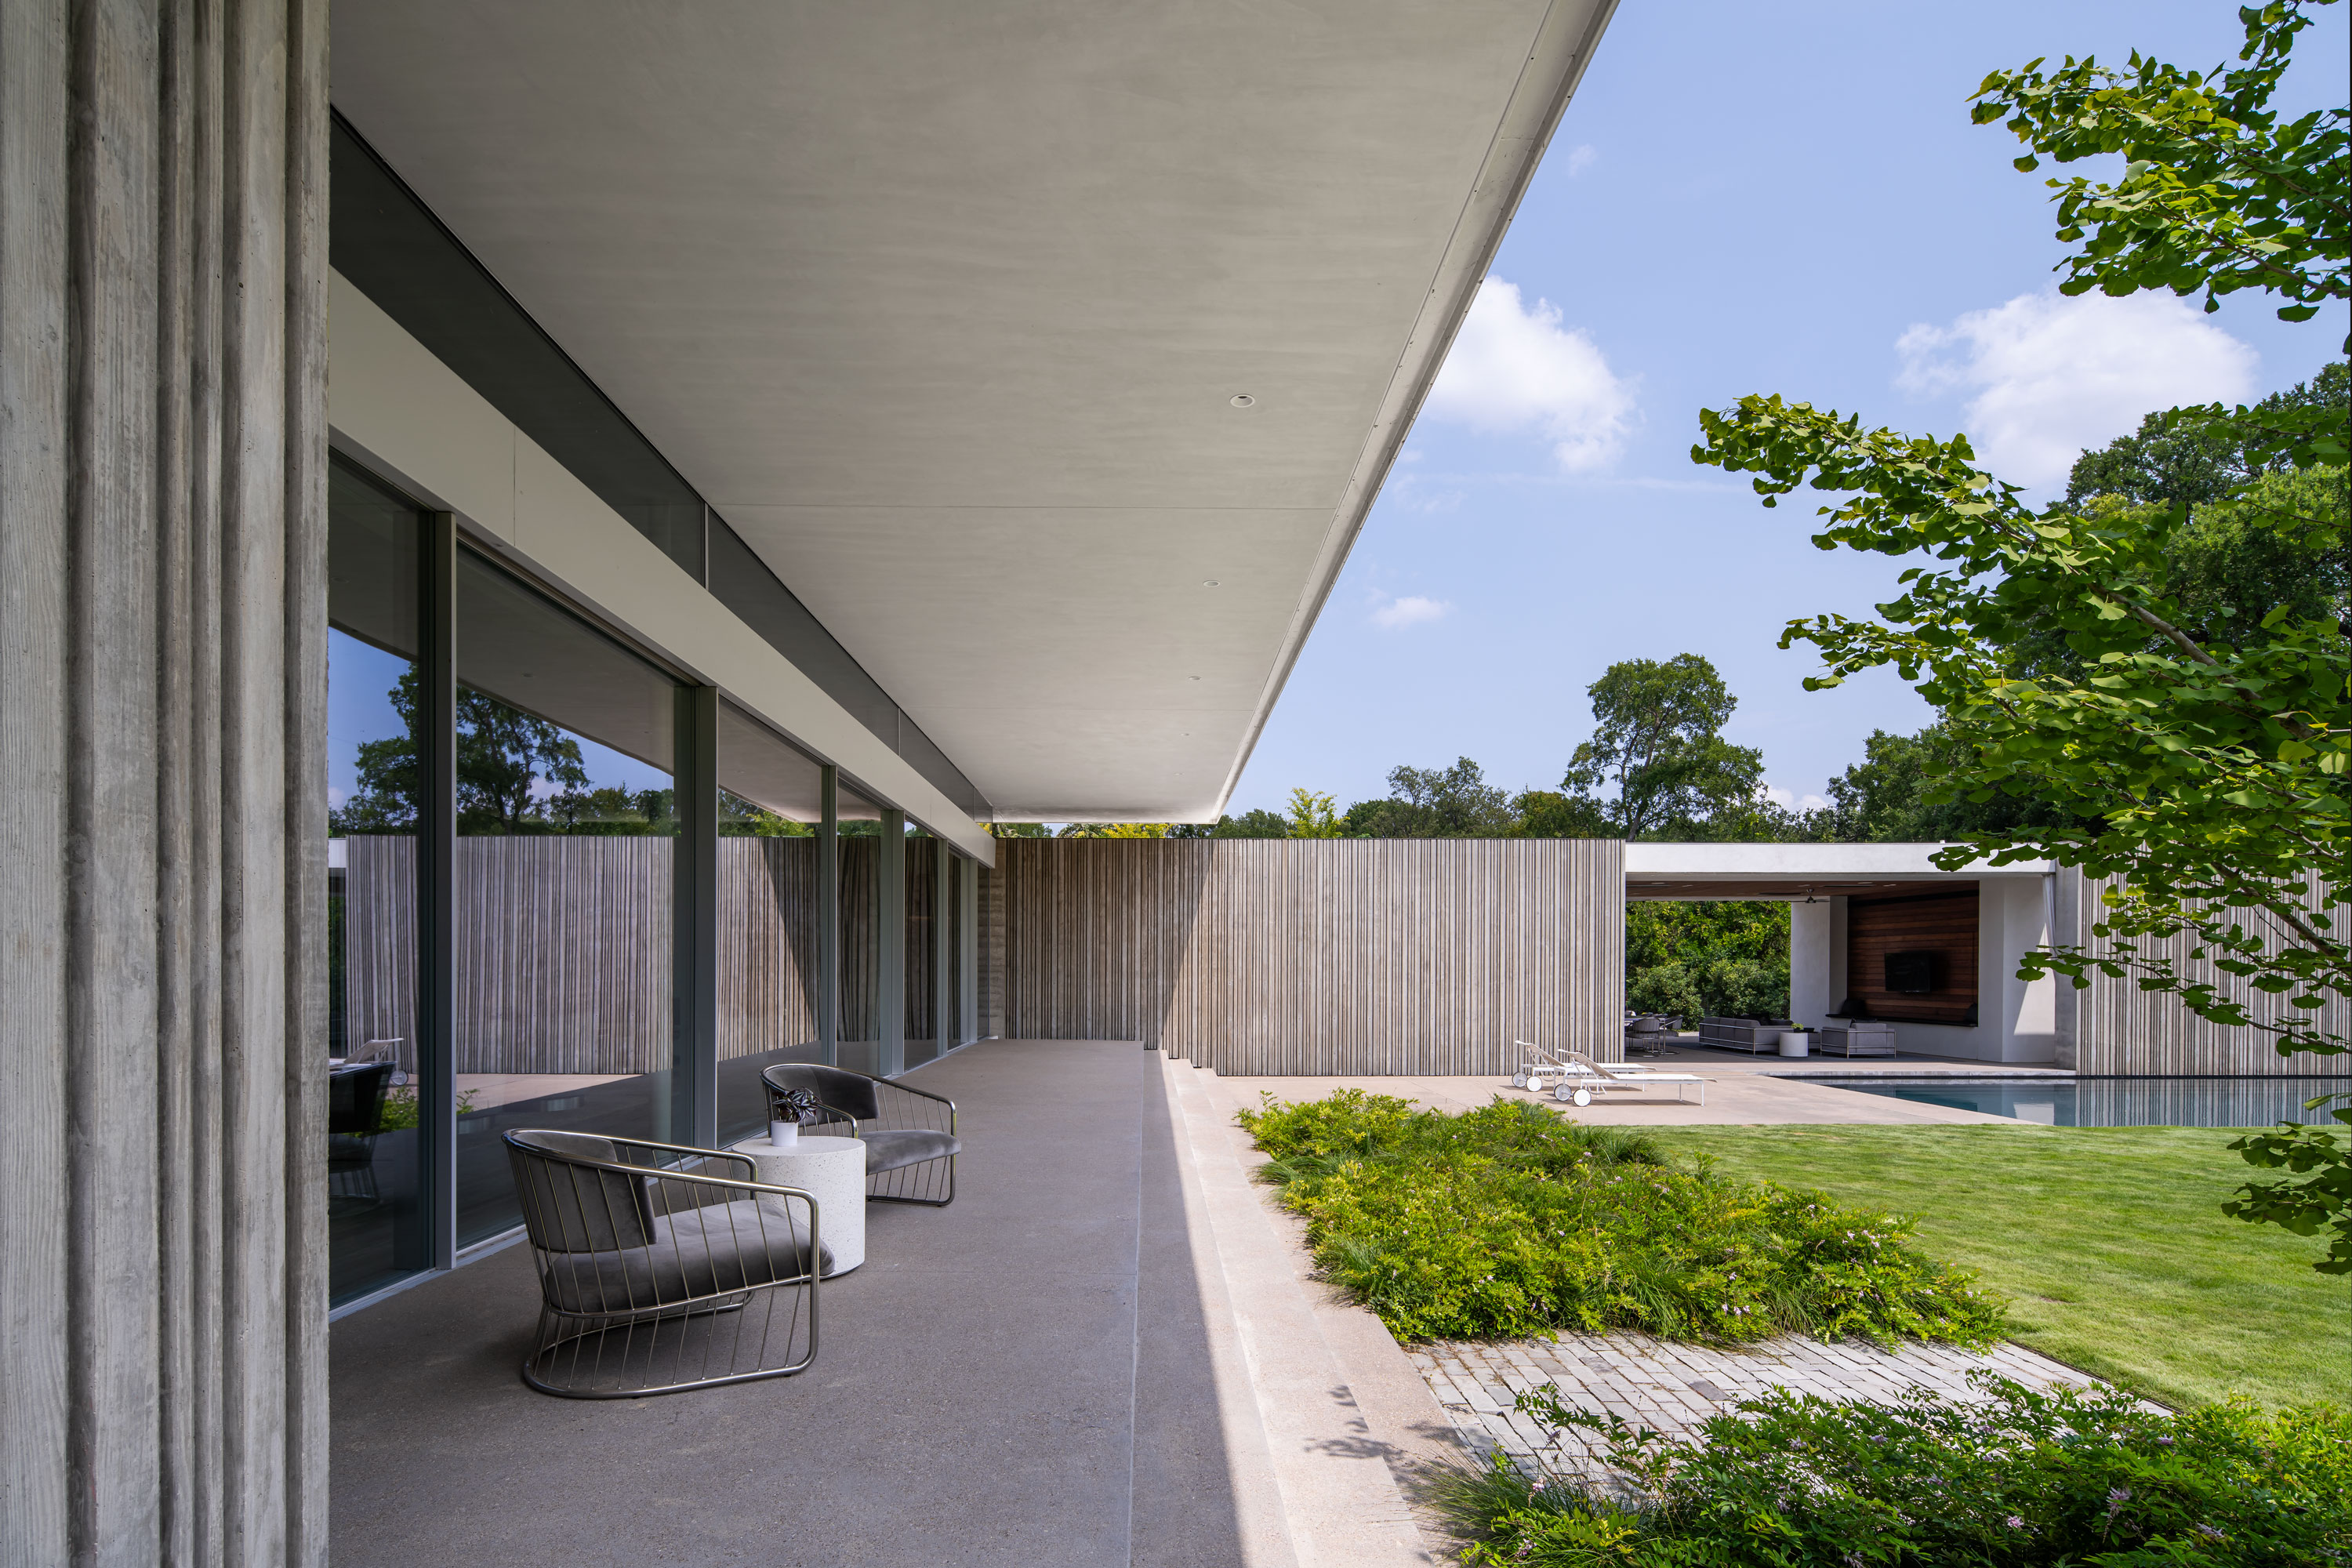 Exterior photo of the Preston Hollow Residence by Specht Novak Architects. Shot in the afternoon by Manolo Langis, featuring the living room terrace, pool, and rear lawn.